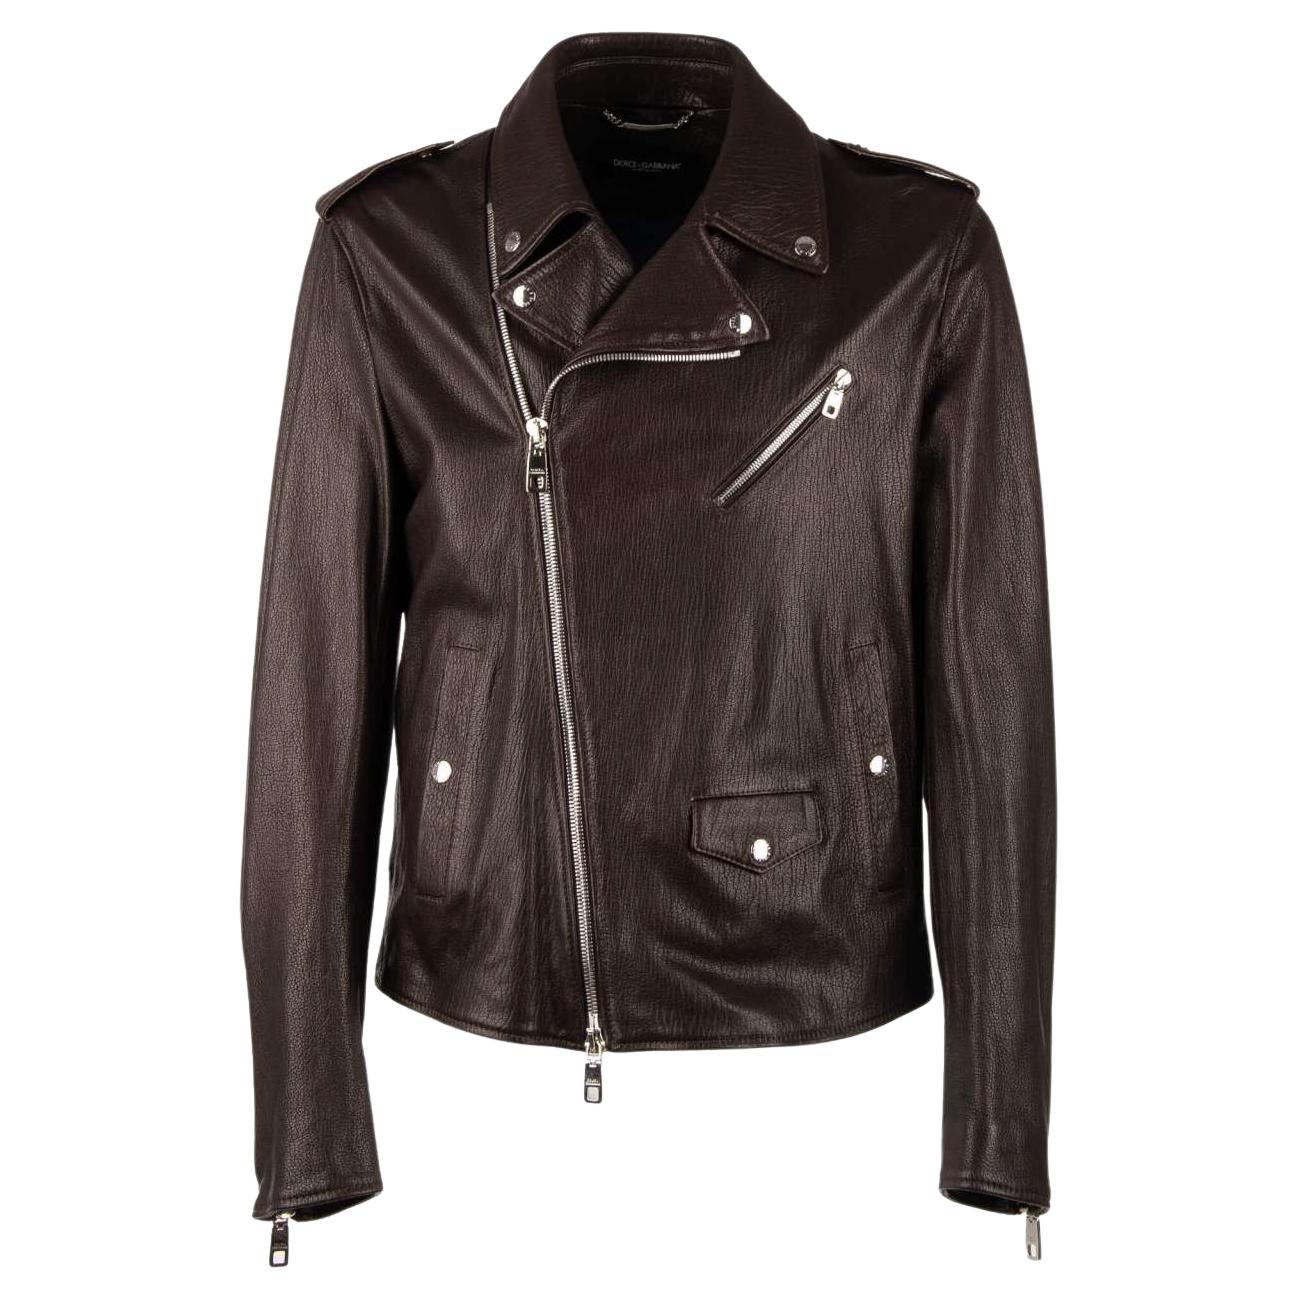 Dolce & Gabbana - Biker Leather Jacket with many Pockets Brown 46 For Sale